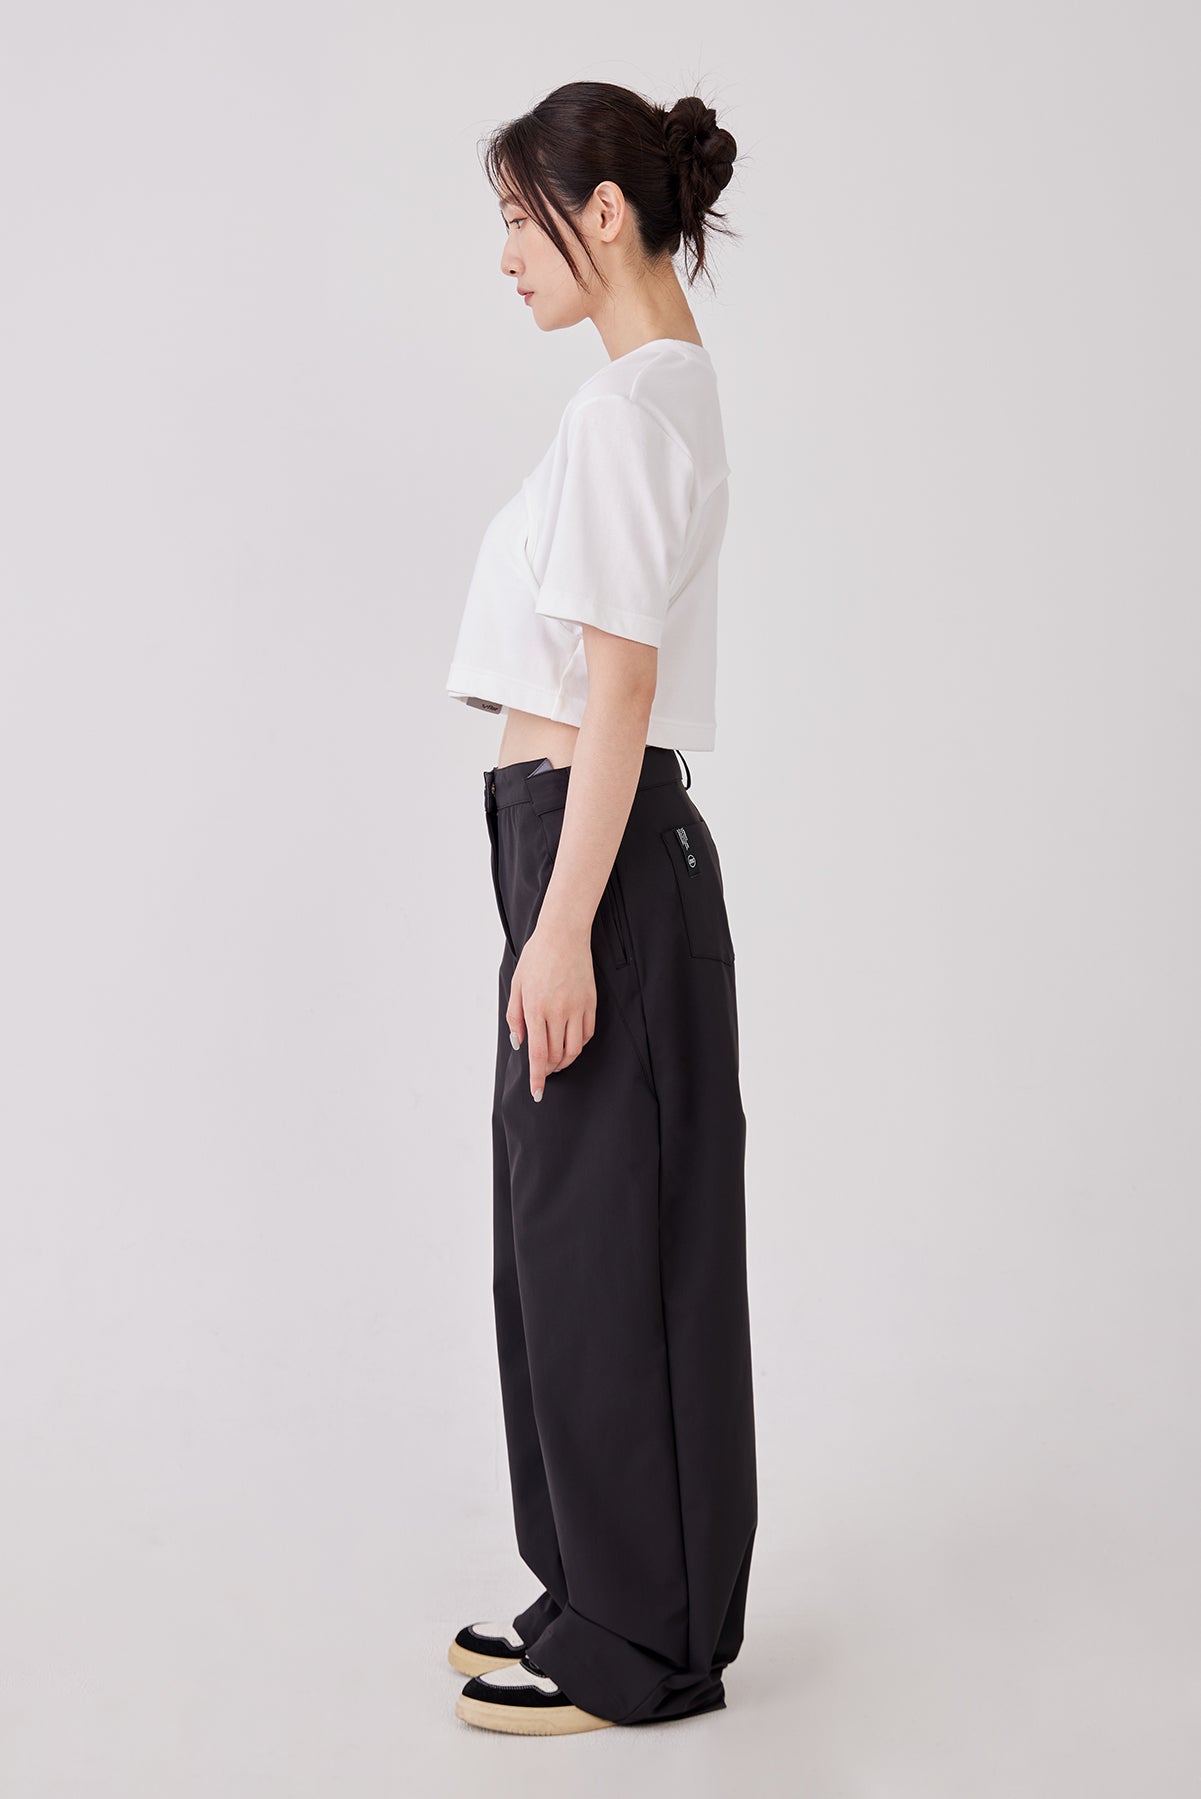 Black Relaxed-Fit Pants